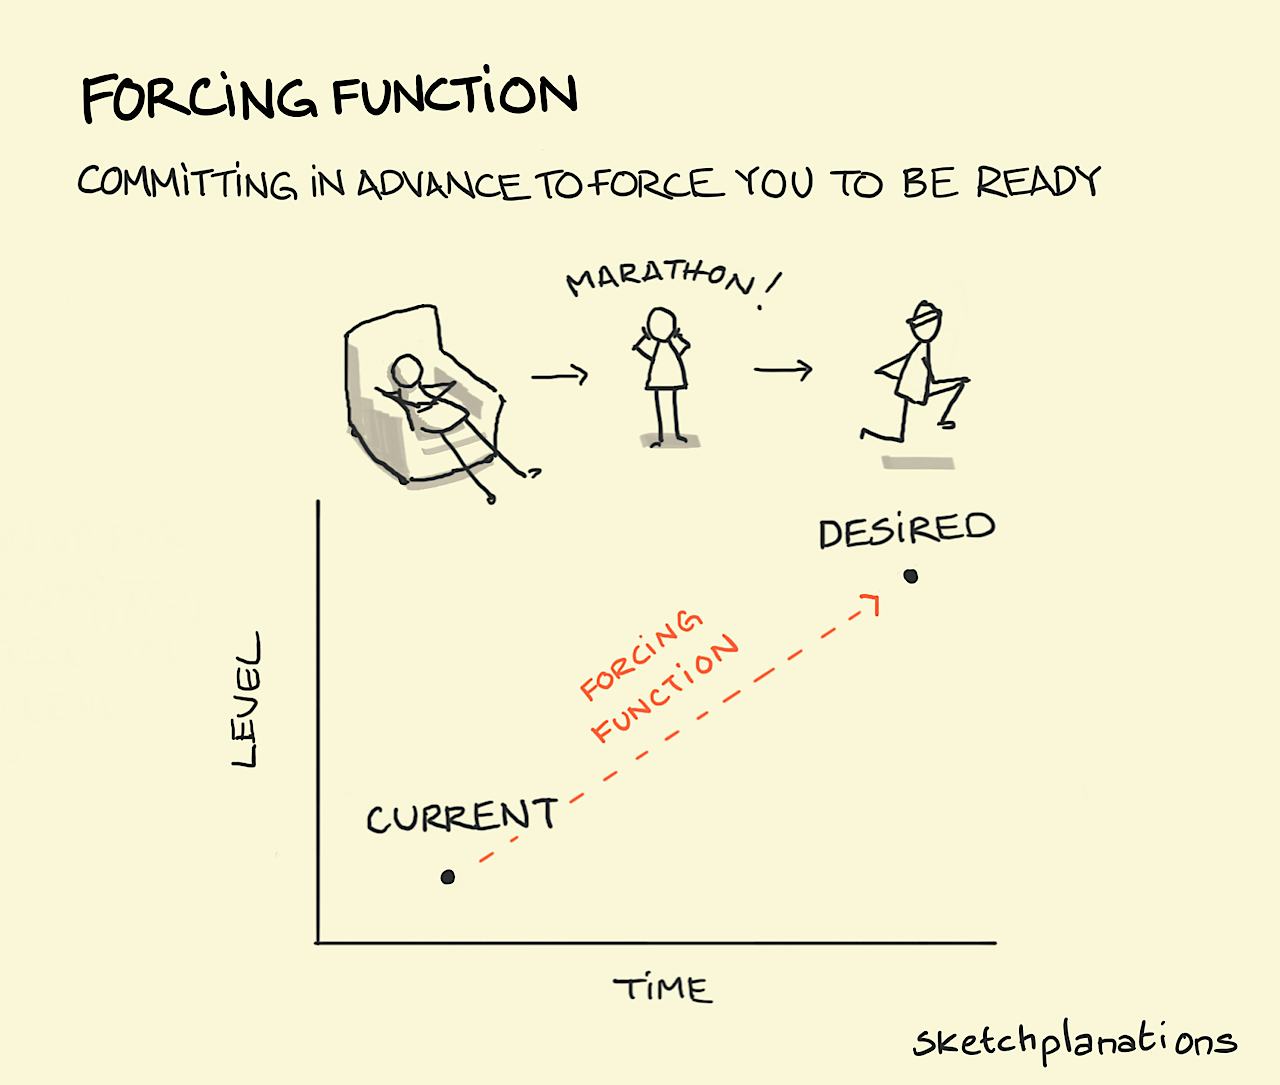 Forcing function: a person is forced into getting into shape after signing up to a marathon